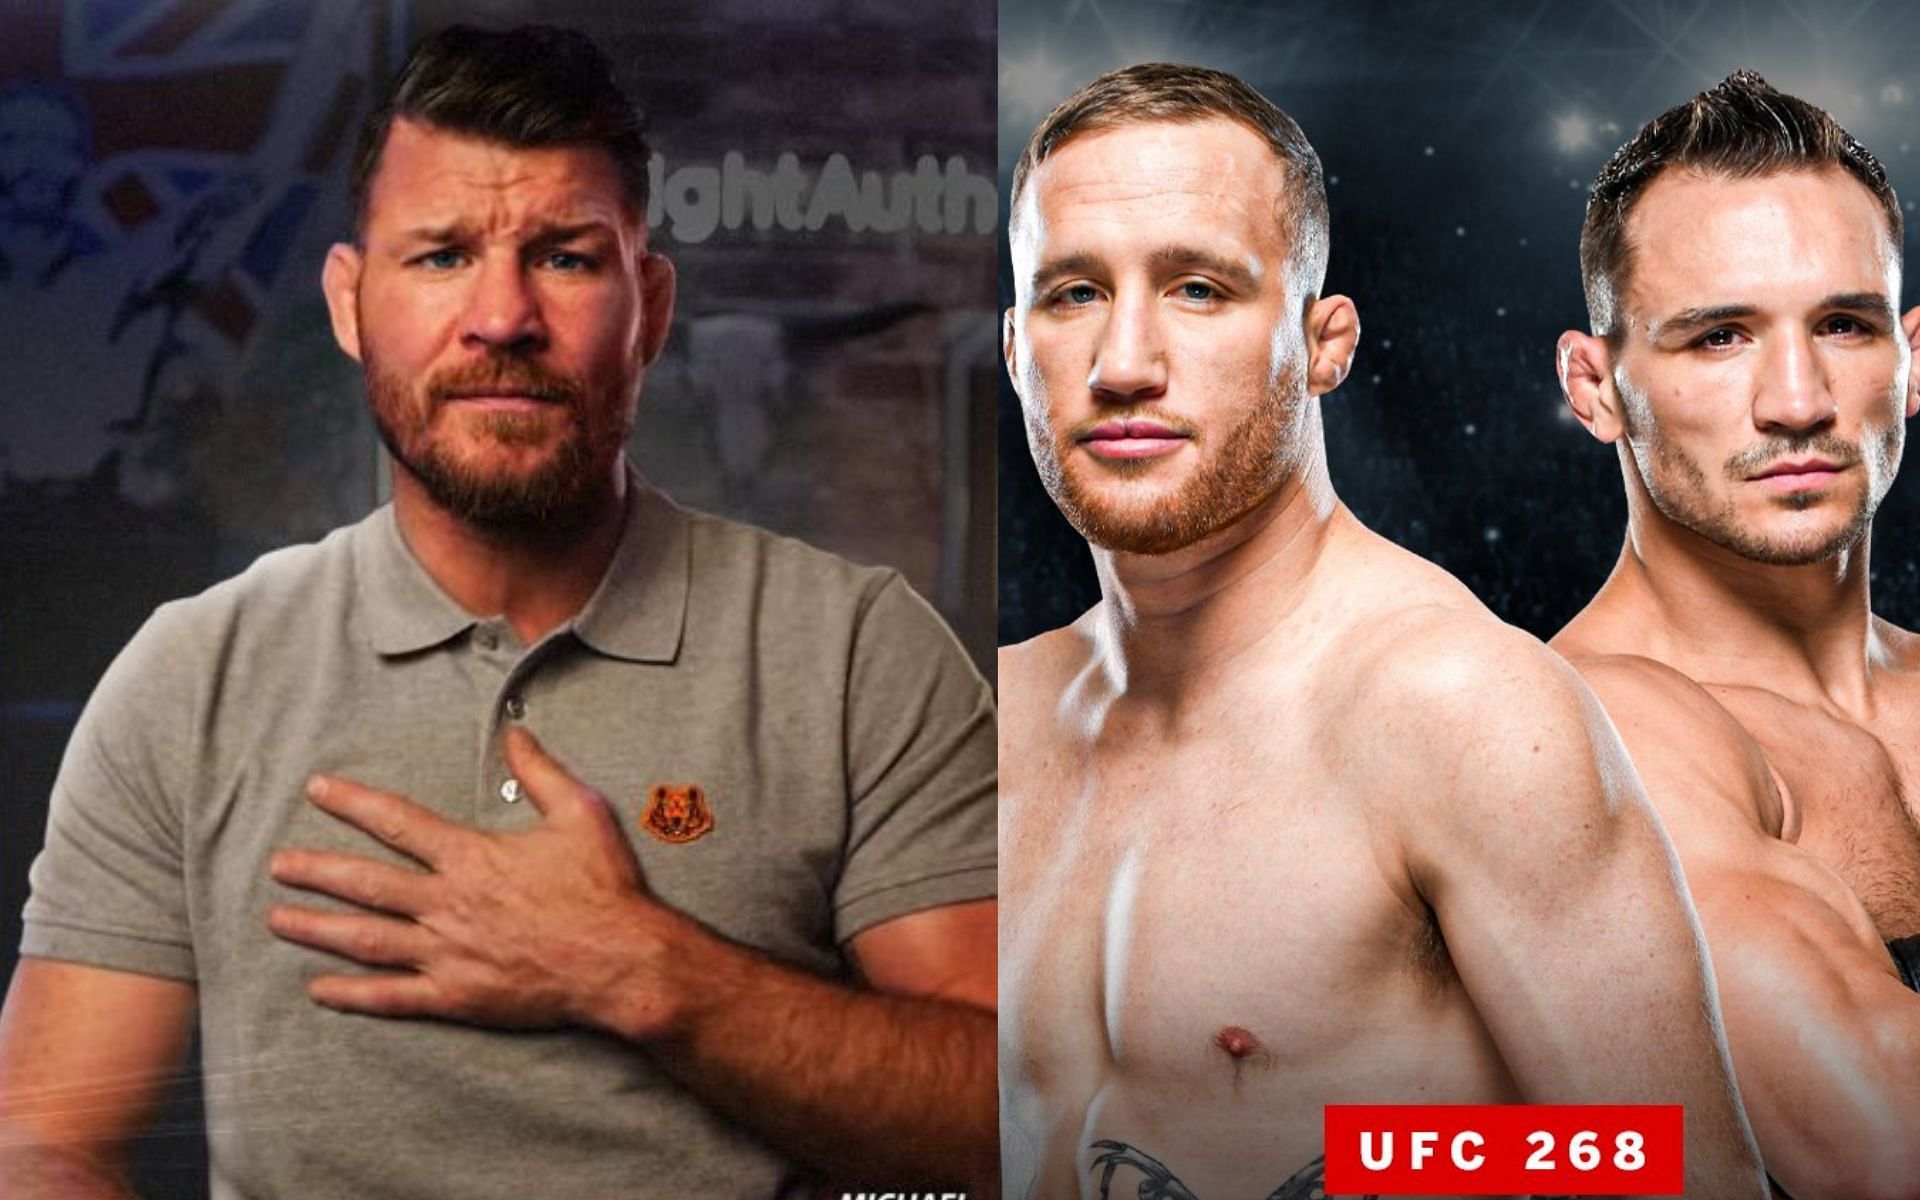 Michael Bisping (left), Justin Gaethje vs Michael Chandler poster (right) [Credits: @bisping, @espnmma via Twitter]